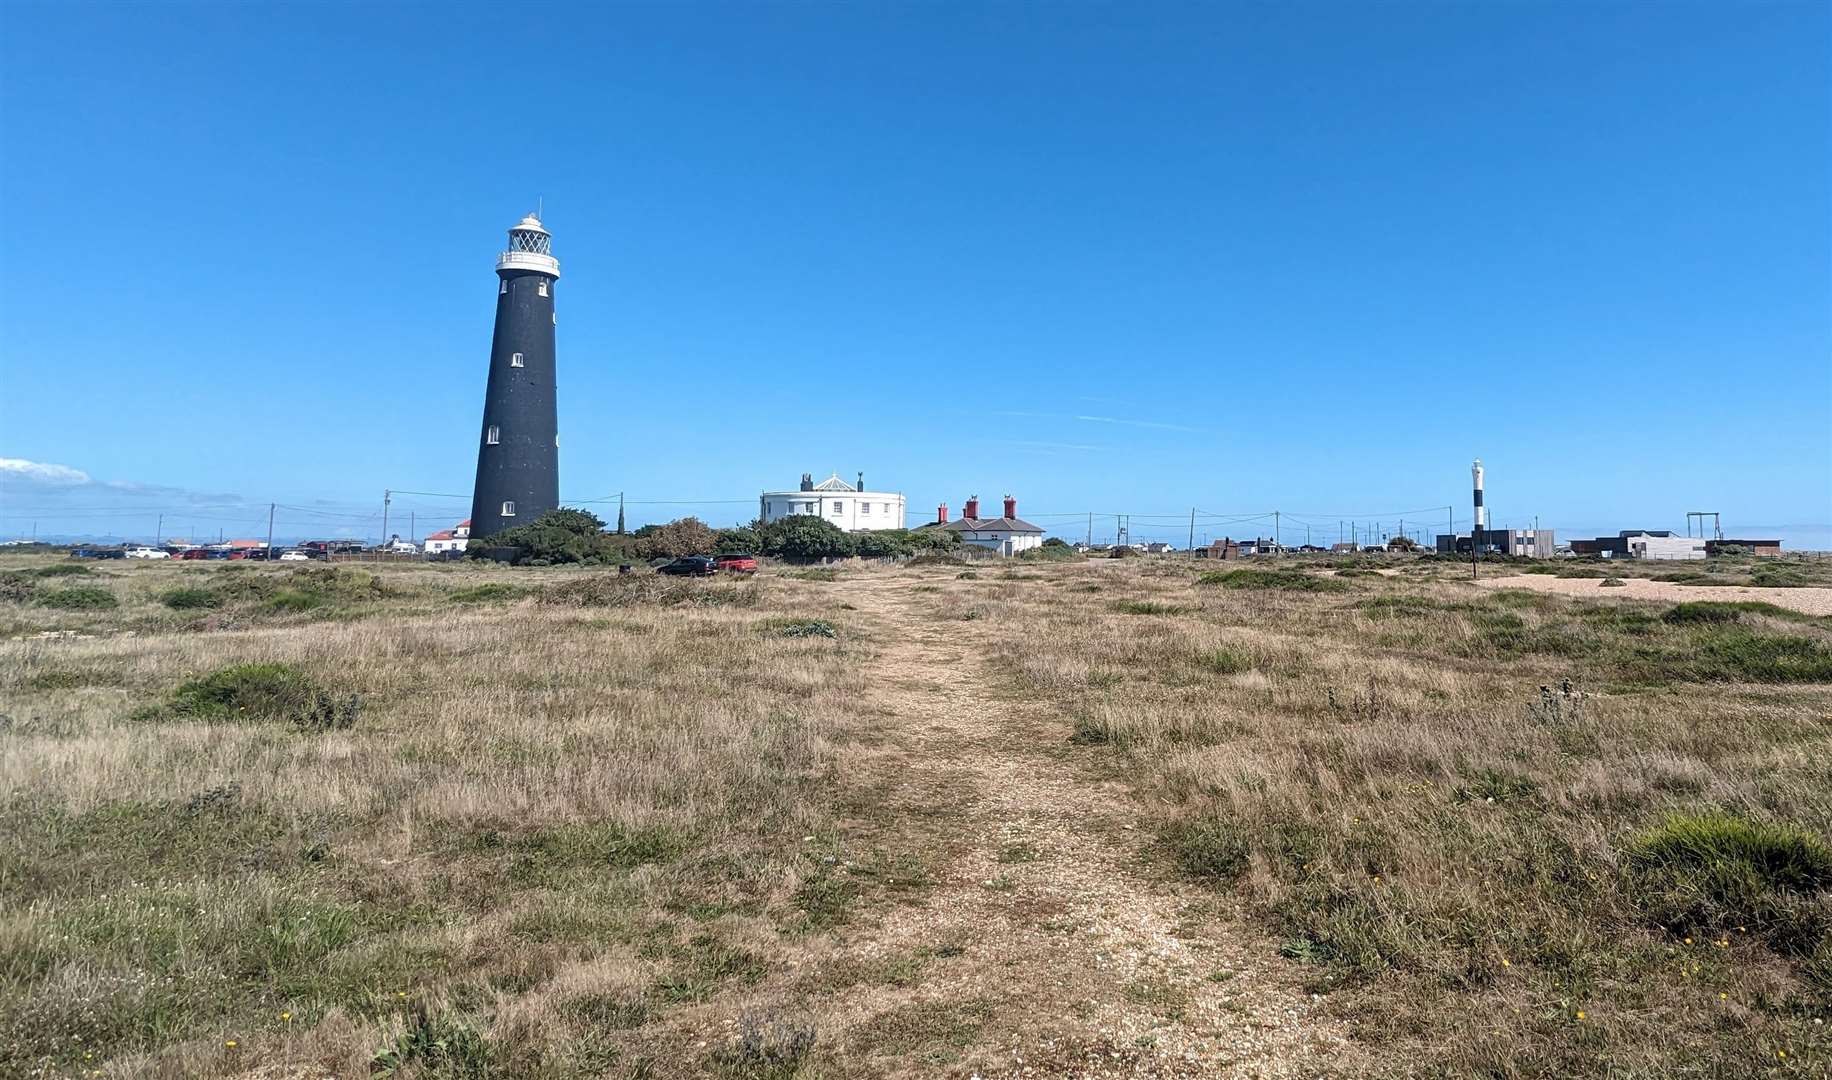 The Old Lighthouse at Dungeness features in Sheeran’s lyrics and in an illustration on the ‘Autumn Variations’ album cover